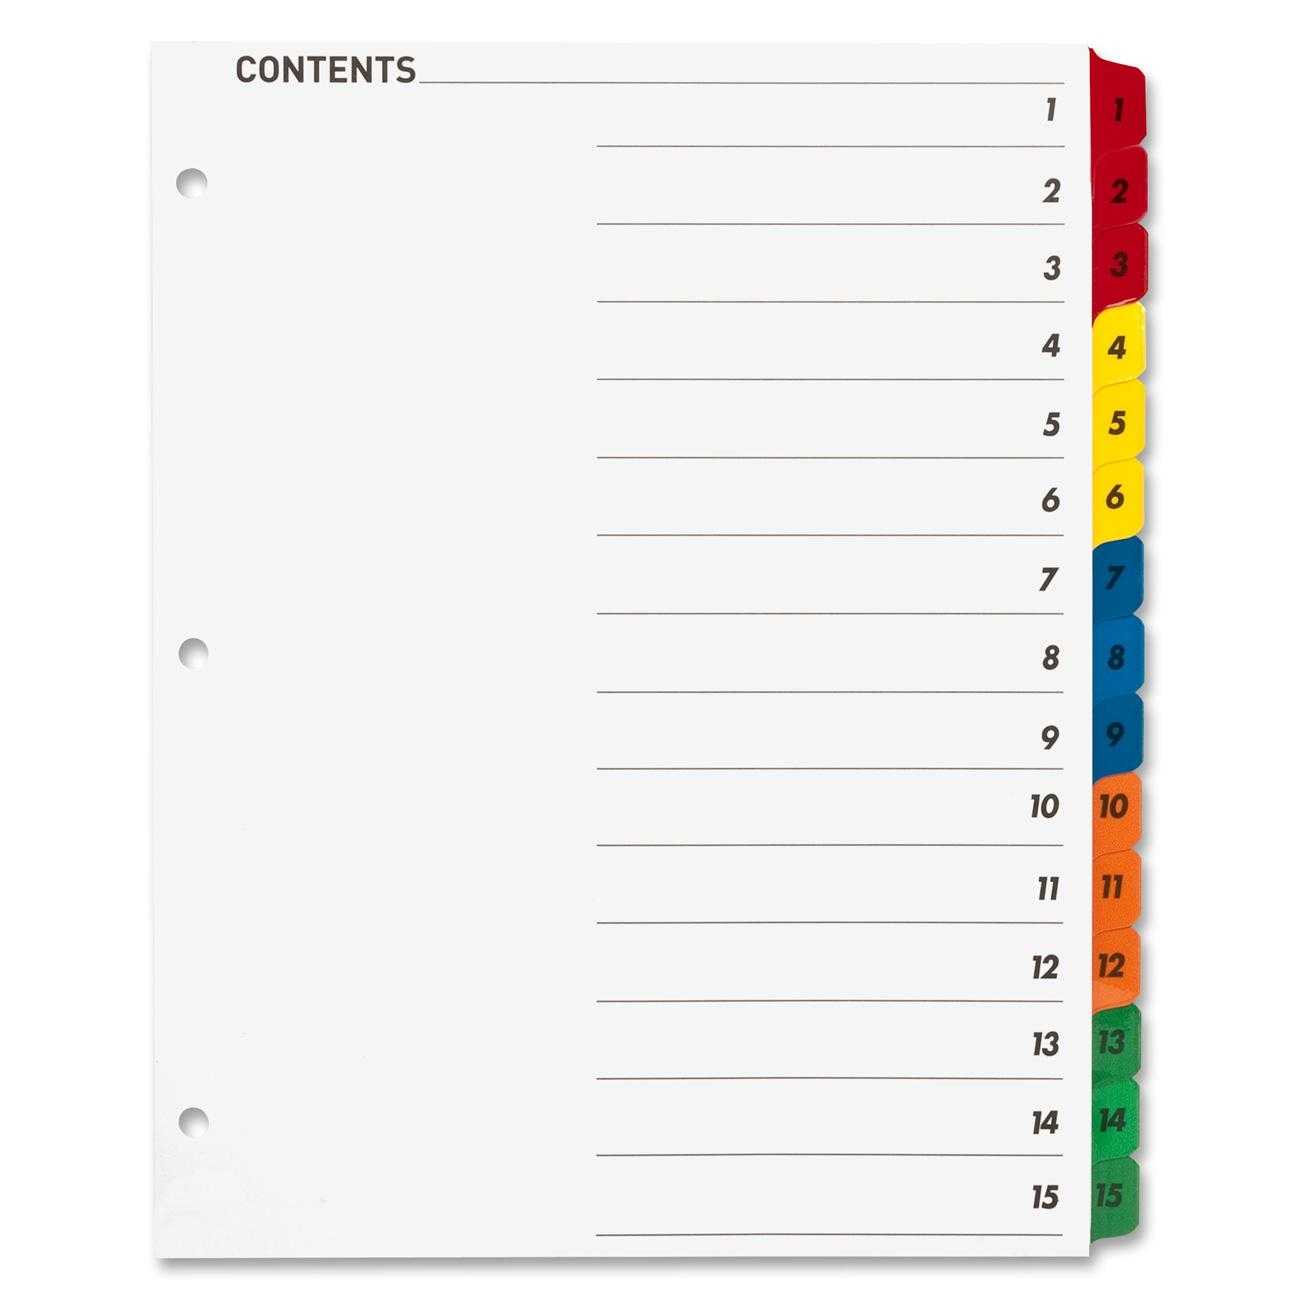 Blank Table Of Contents Layout | Cinemas 93 Regarding Blank Table Of Contents Template